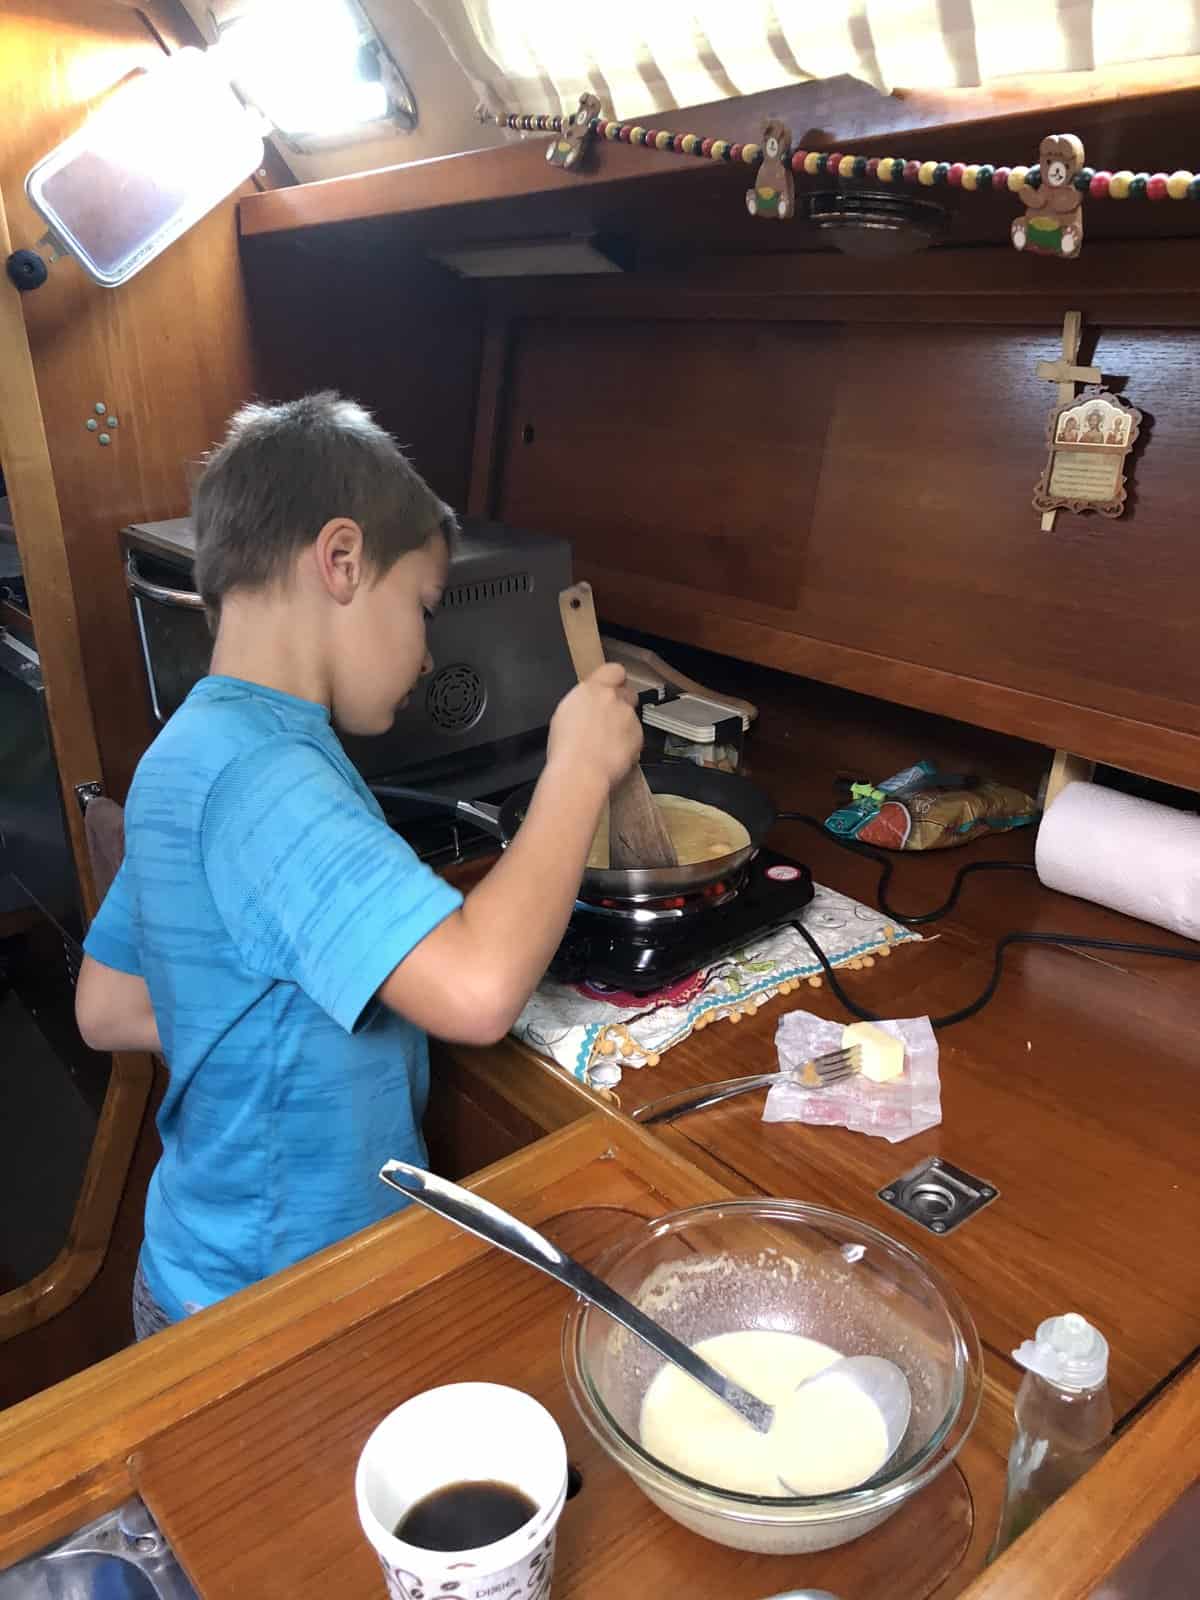 a boy mixing and baking pancakes in the galley of a boat